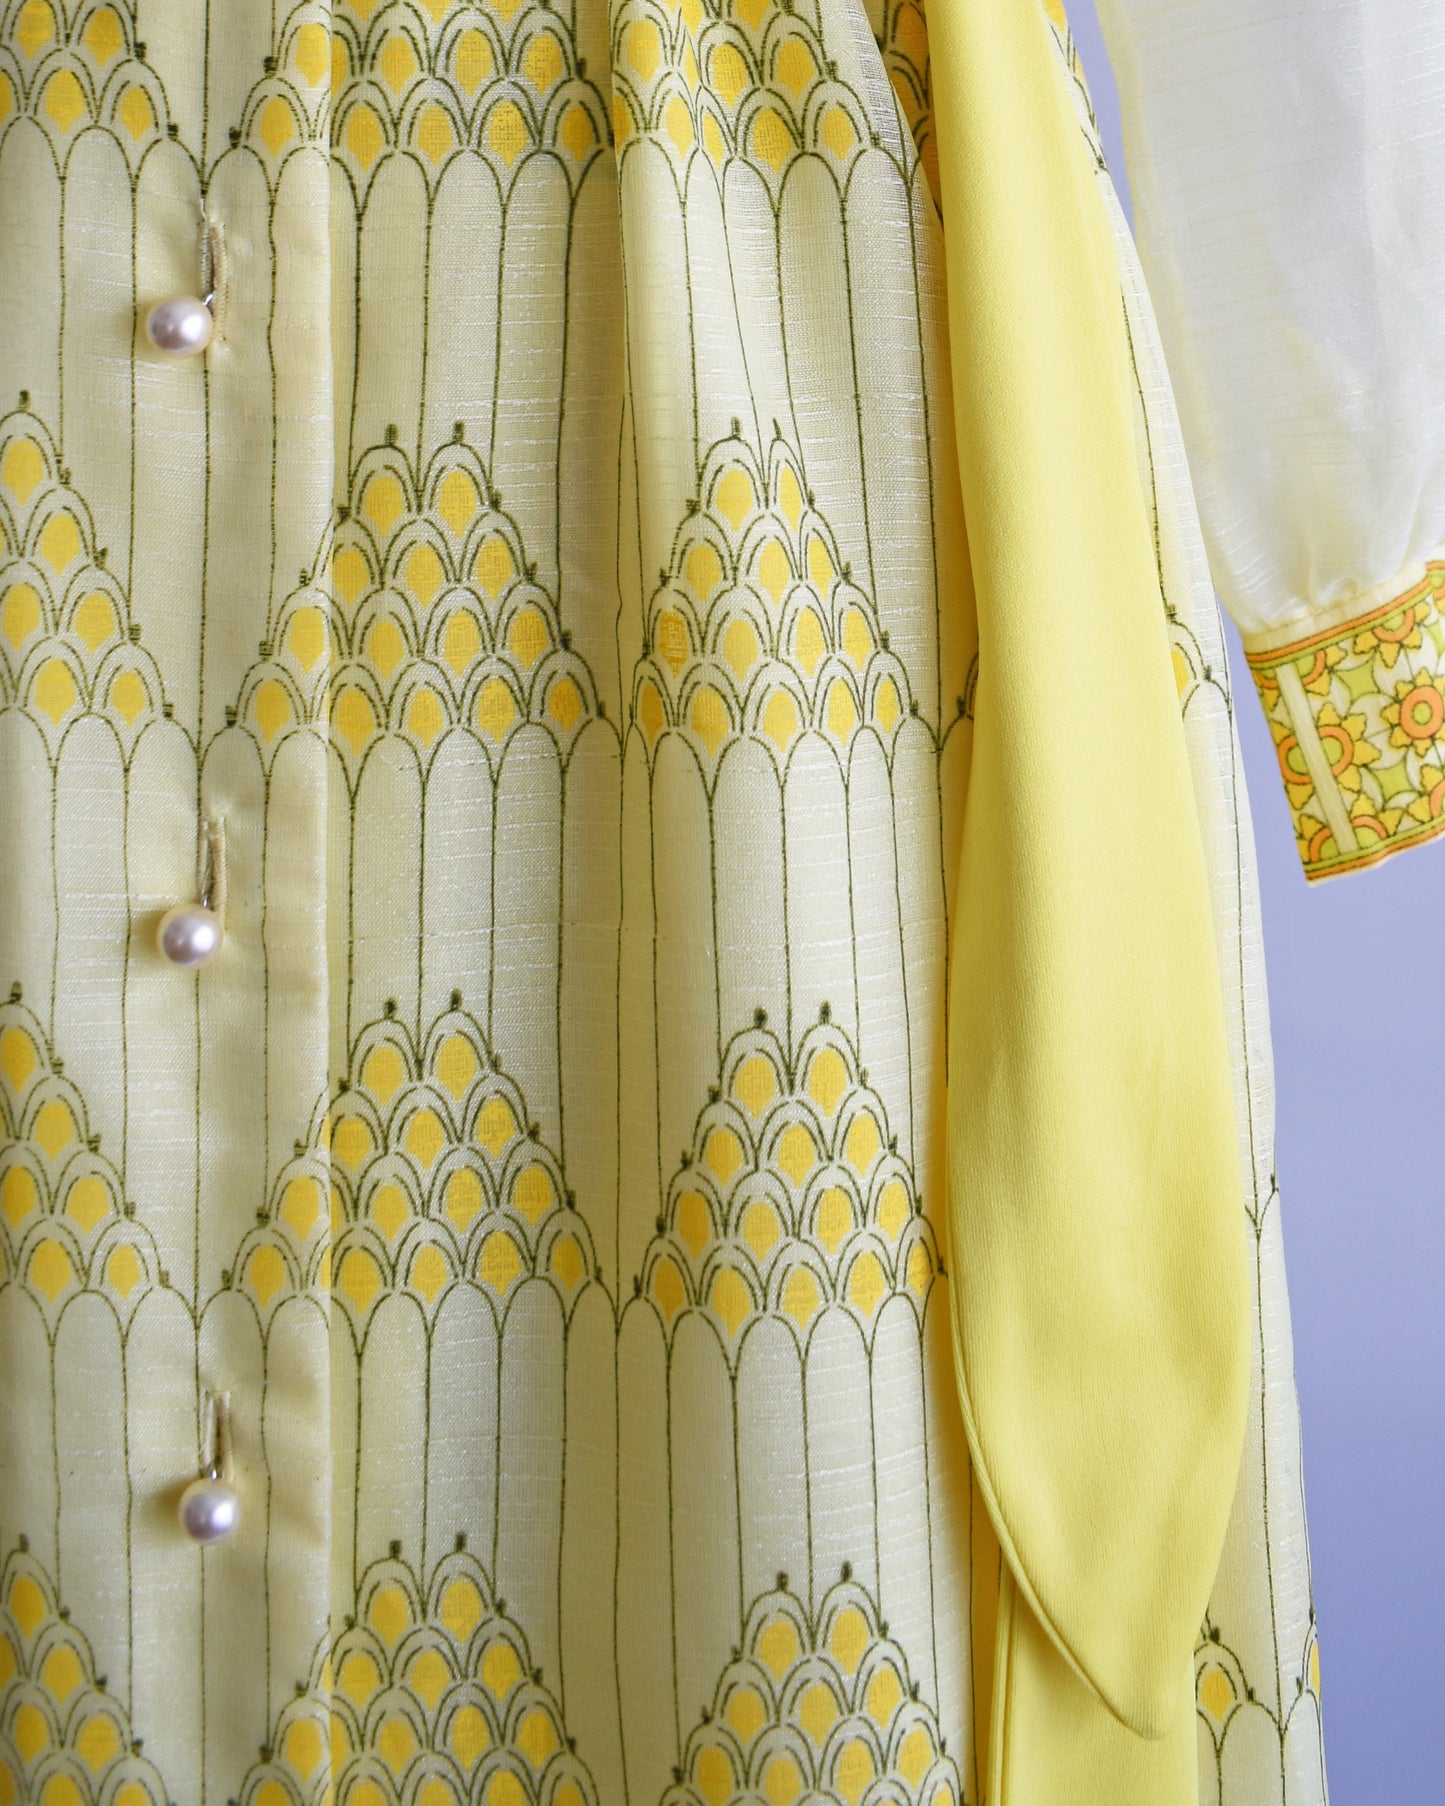 Close up of the pyramid print and buttons on the skirt and yellow sash